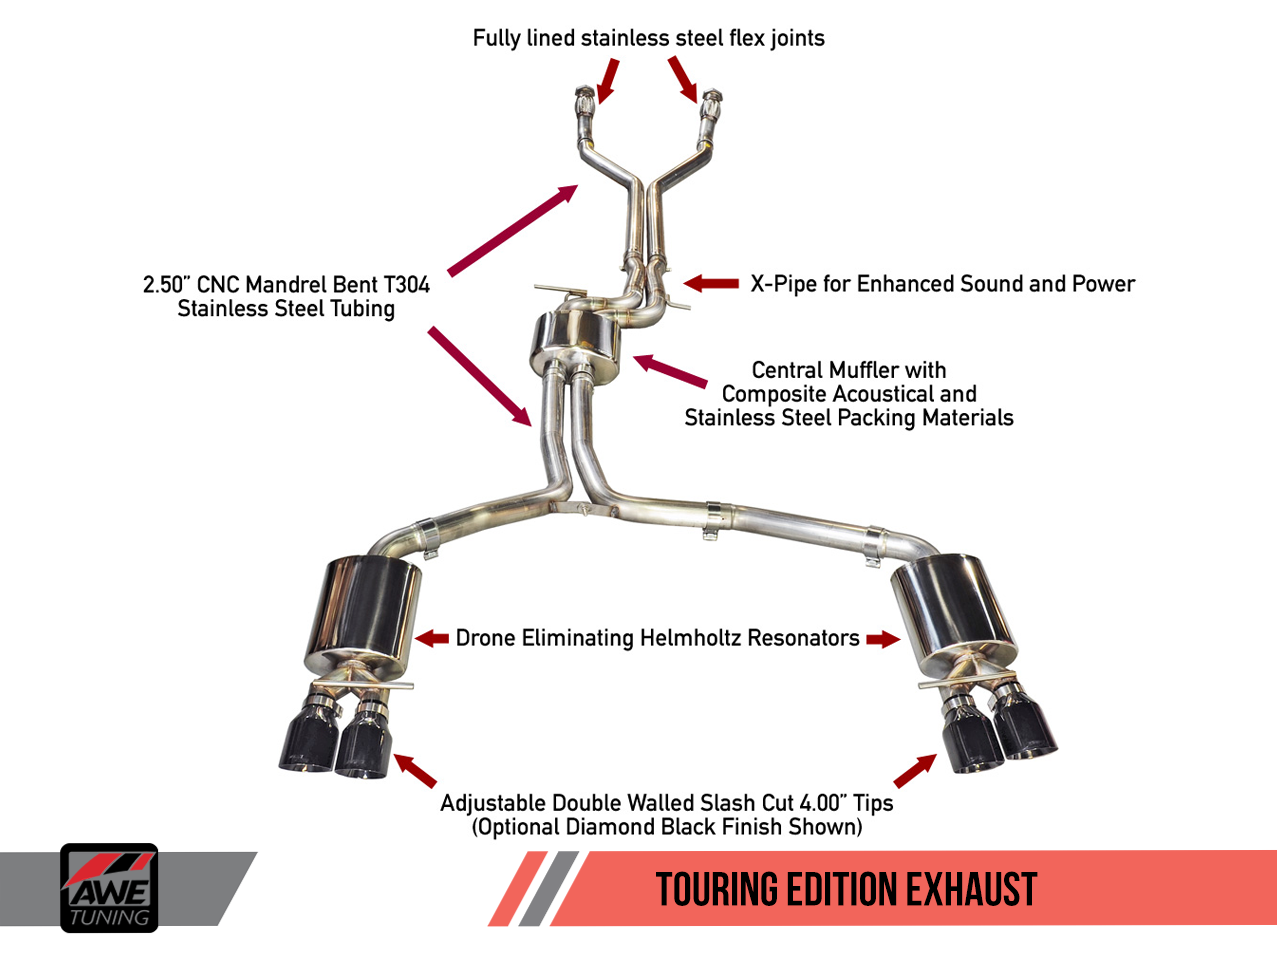 AWE Track Edition Exhaust for Audi C7 S6 4.0T - Motorsports LA